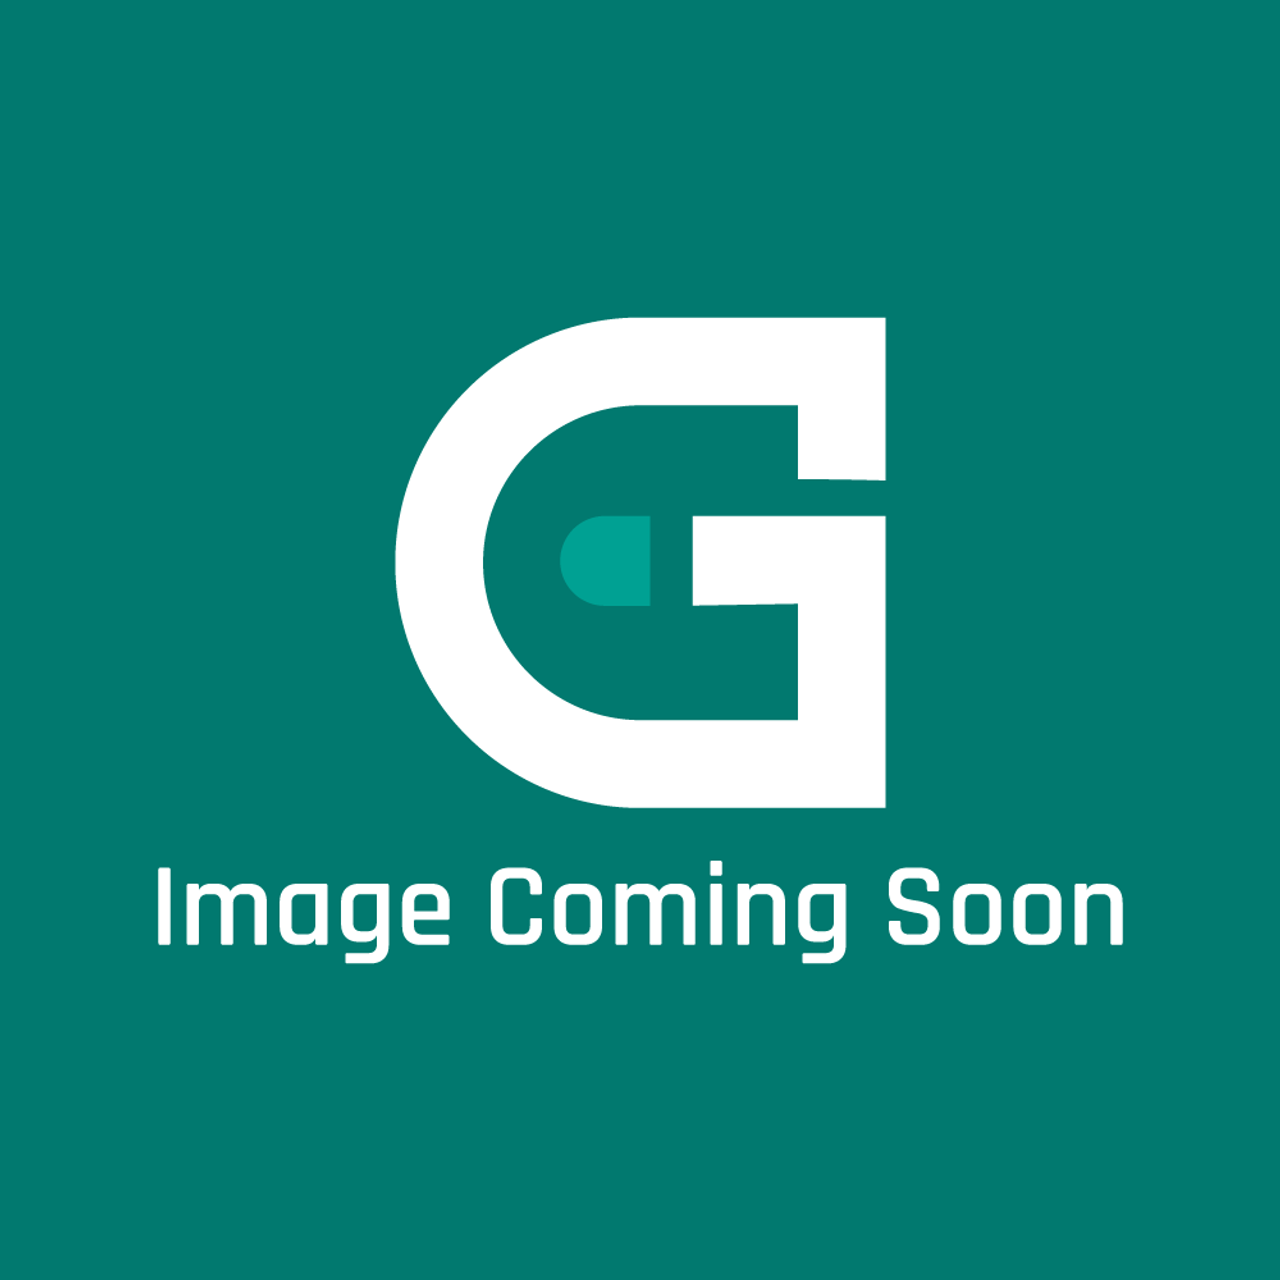 GE Appliances WB34K10112 - Spacer Window - Image Coming Soon!